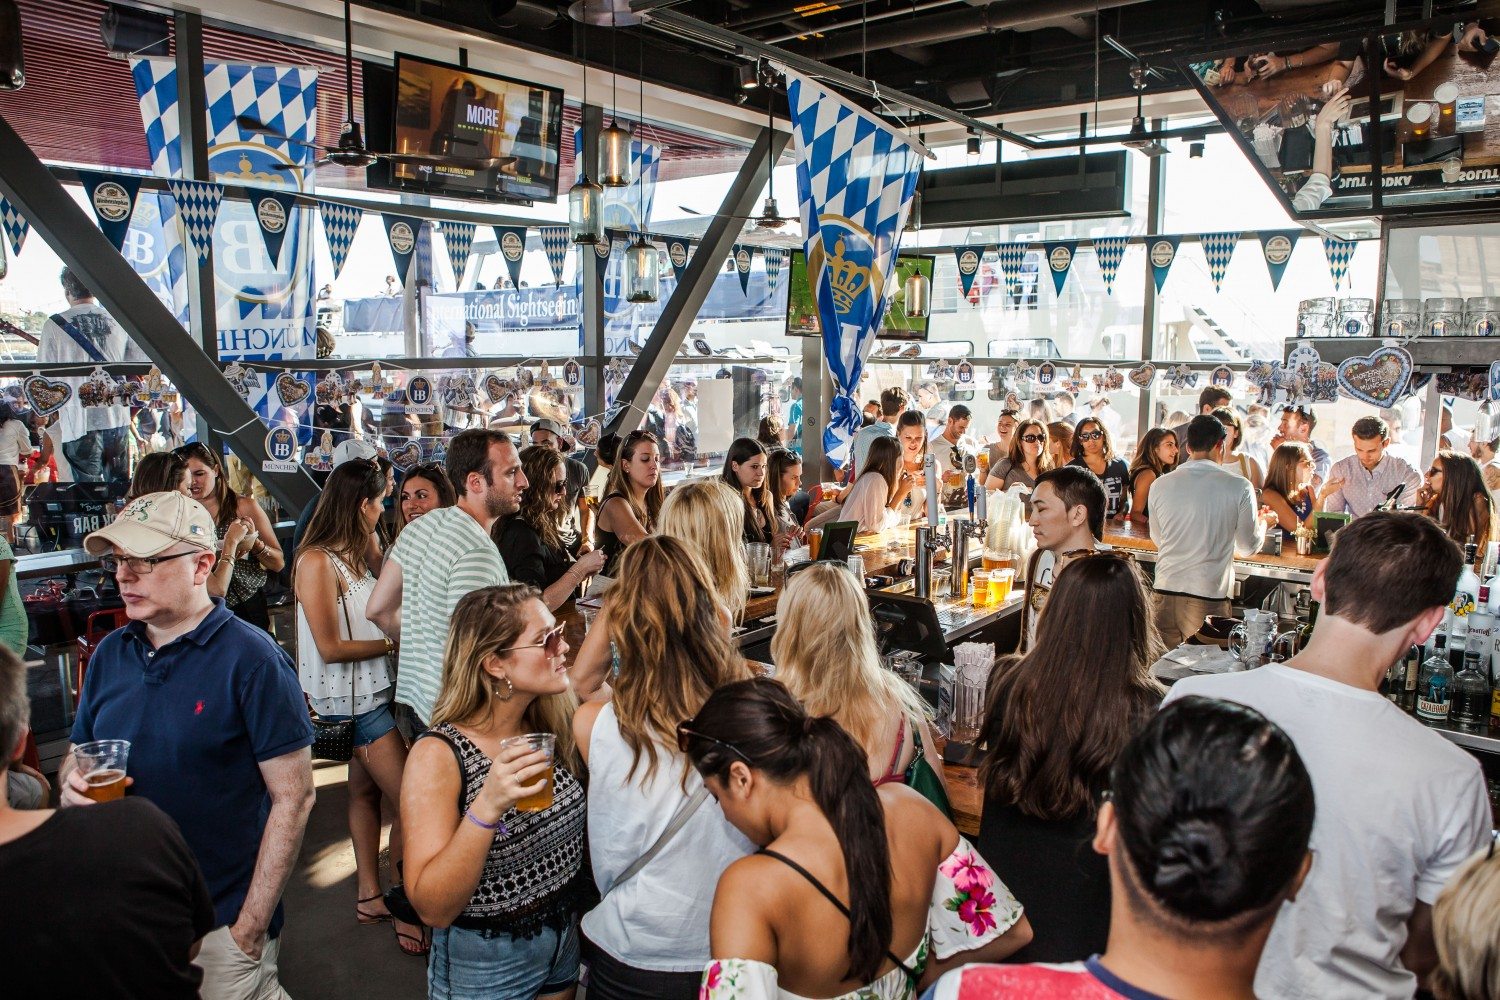 Pier 15’s Watermark Bar To Host Oktoberfest From Sept. 17 To Oct. 2